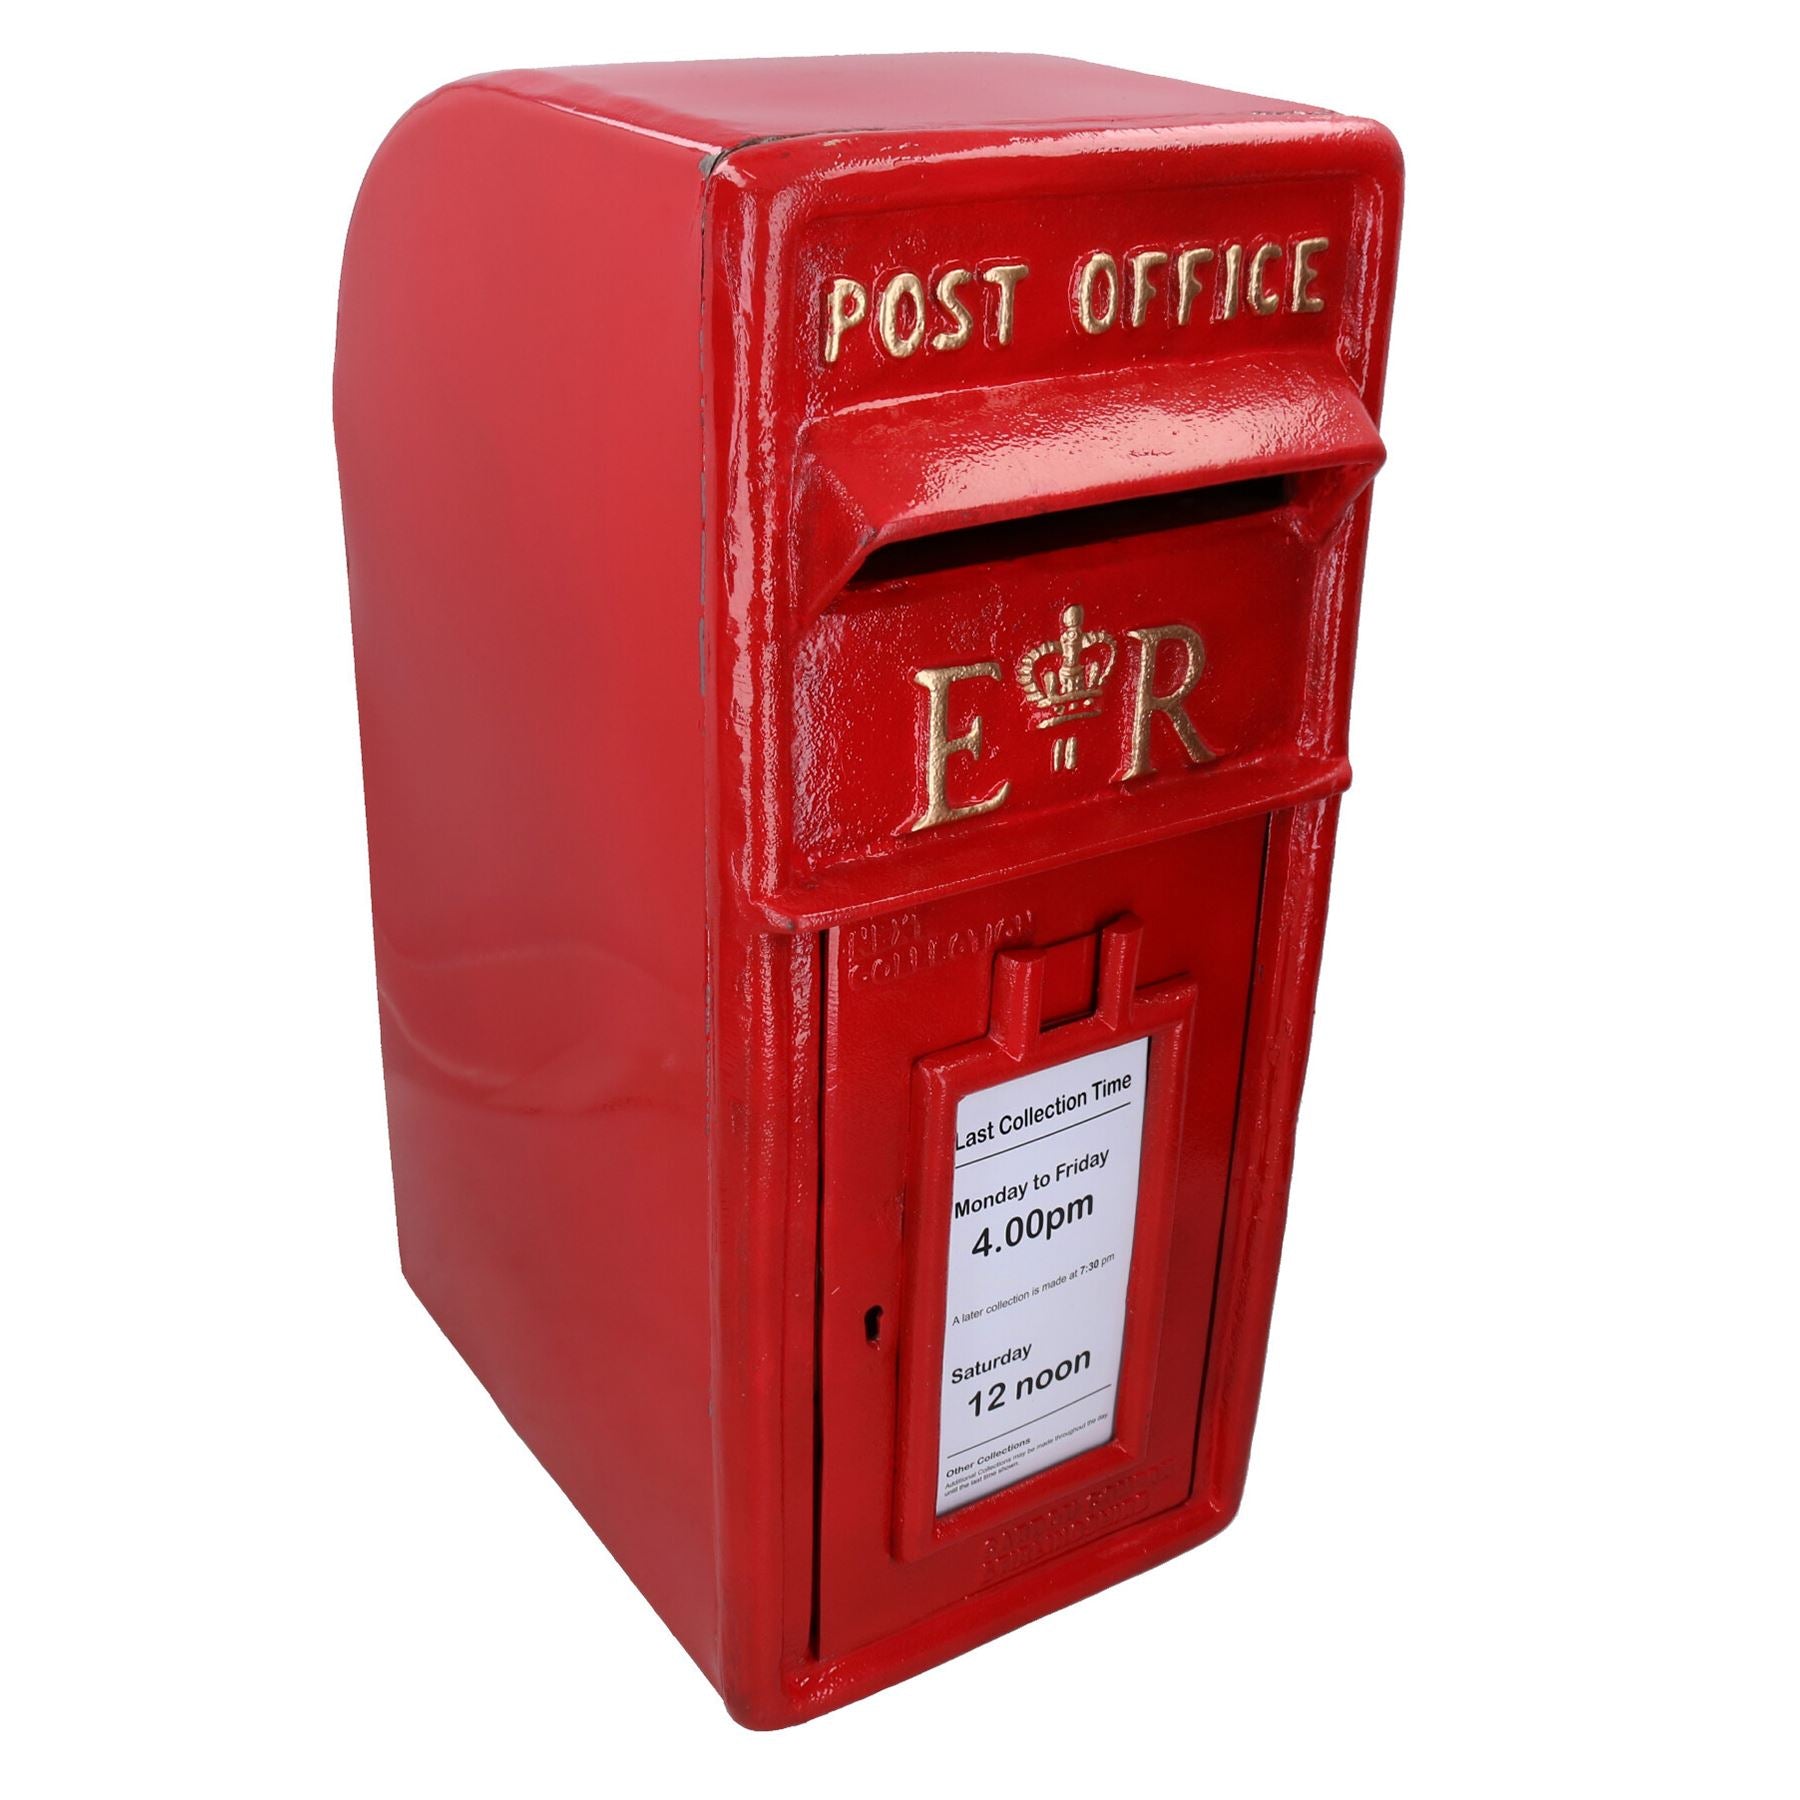 ER Royal Mail Post Mail Letter Box Replica Cast Iron Red Lockable Damaged Paint